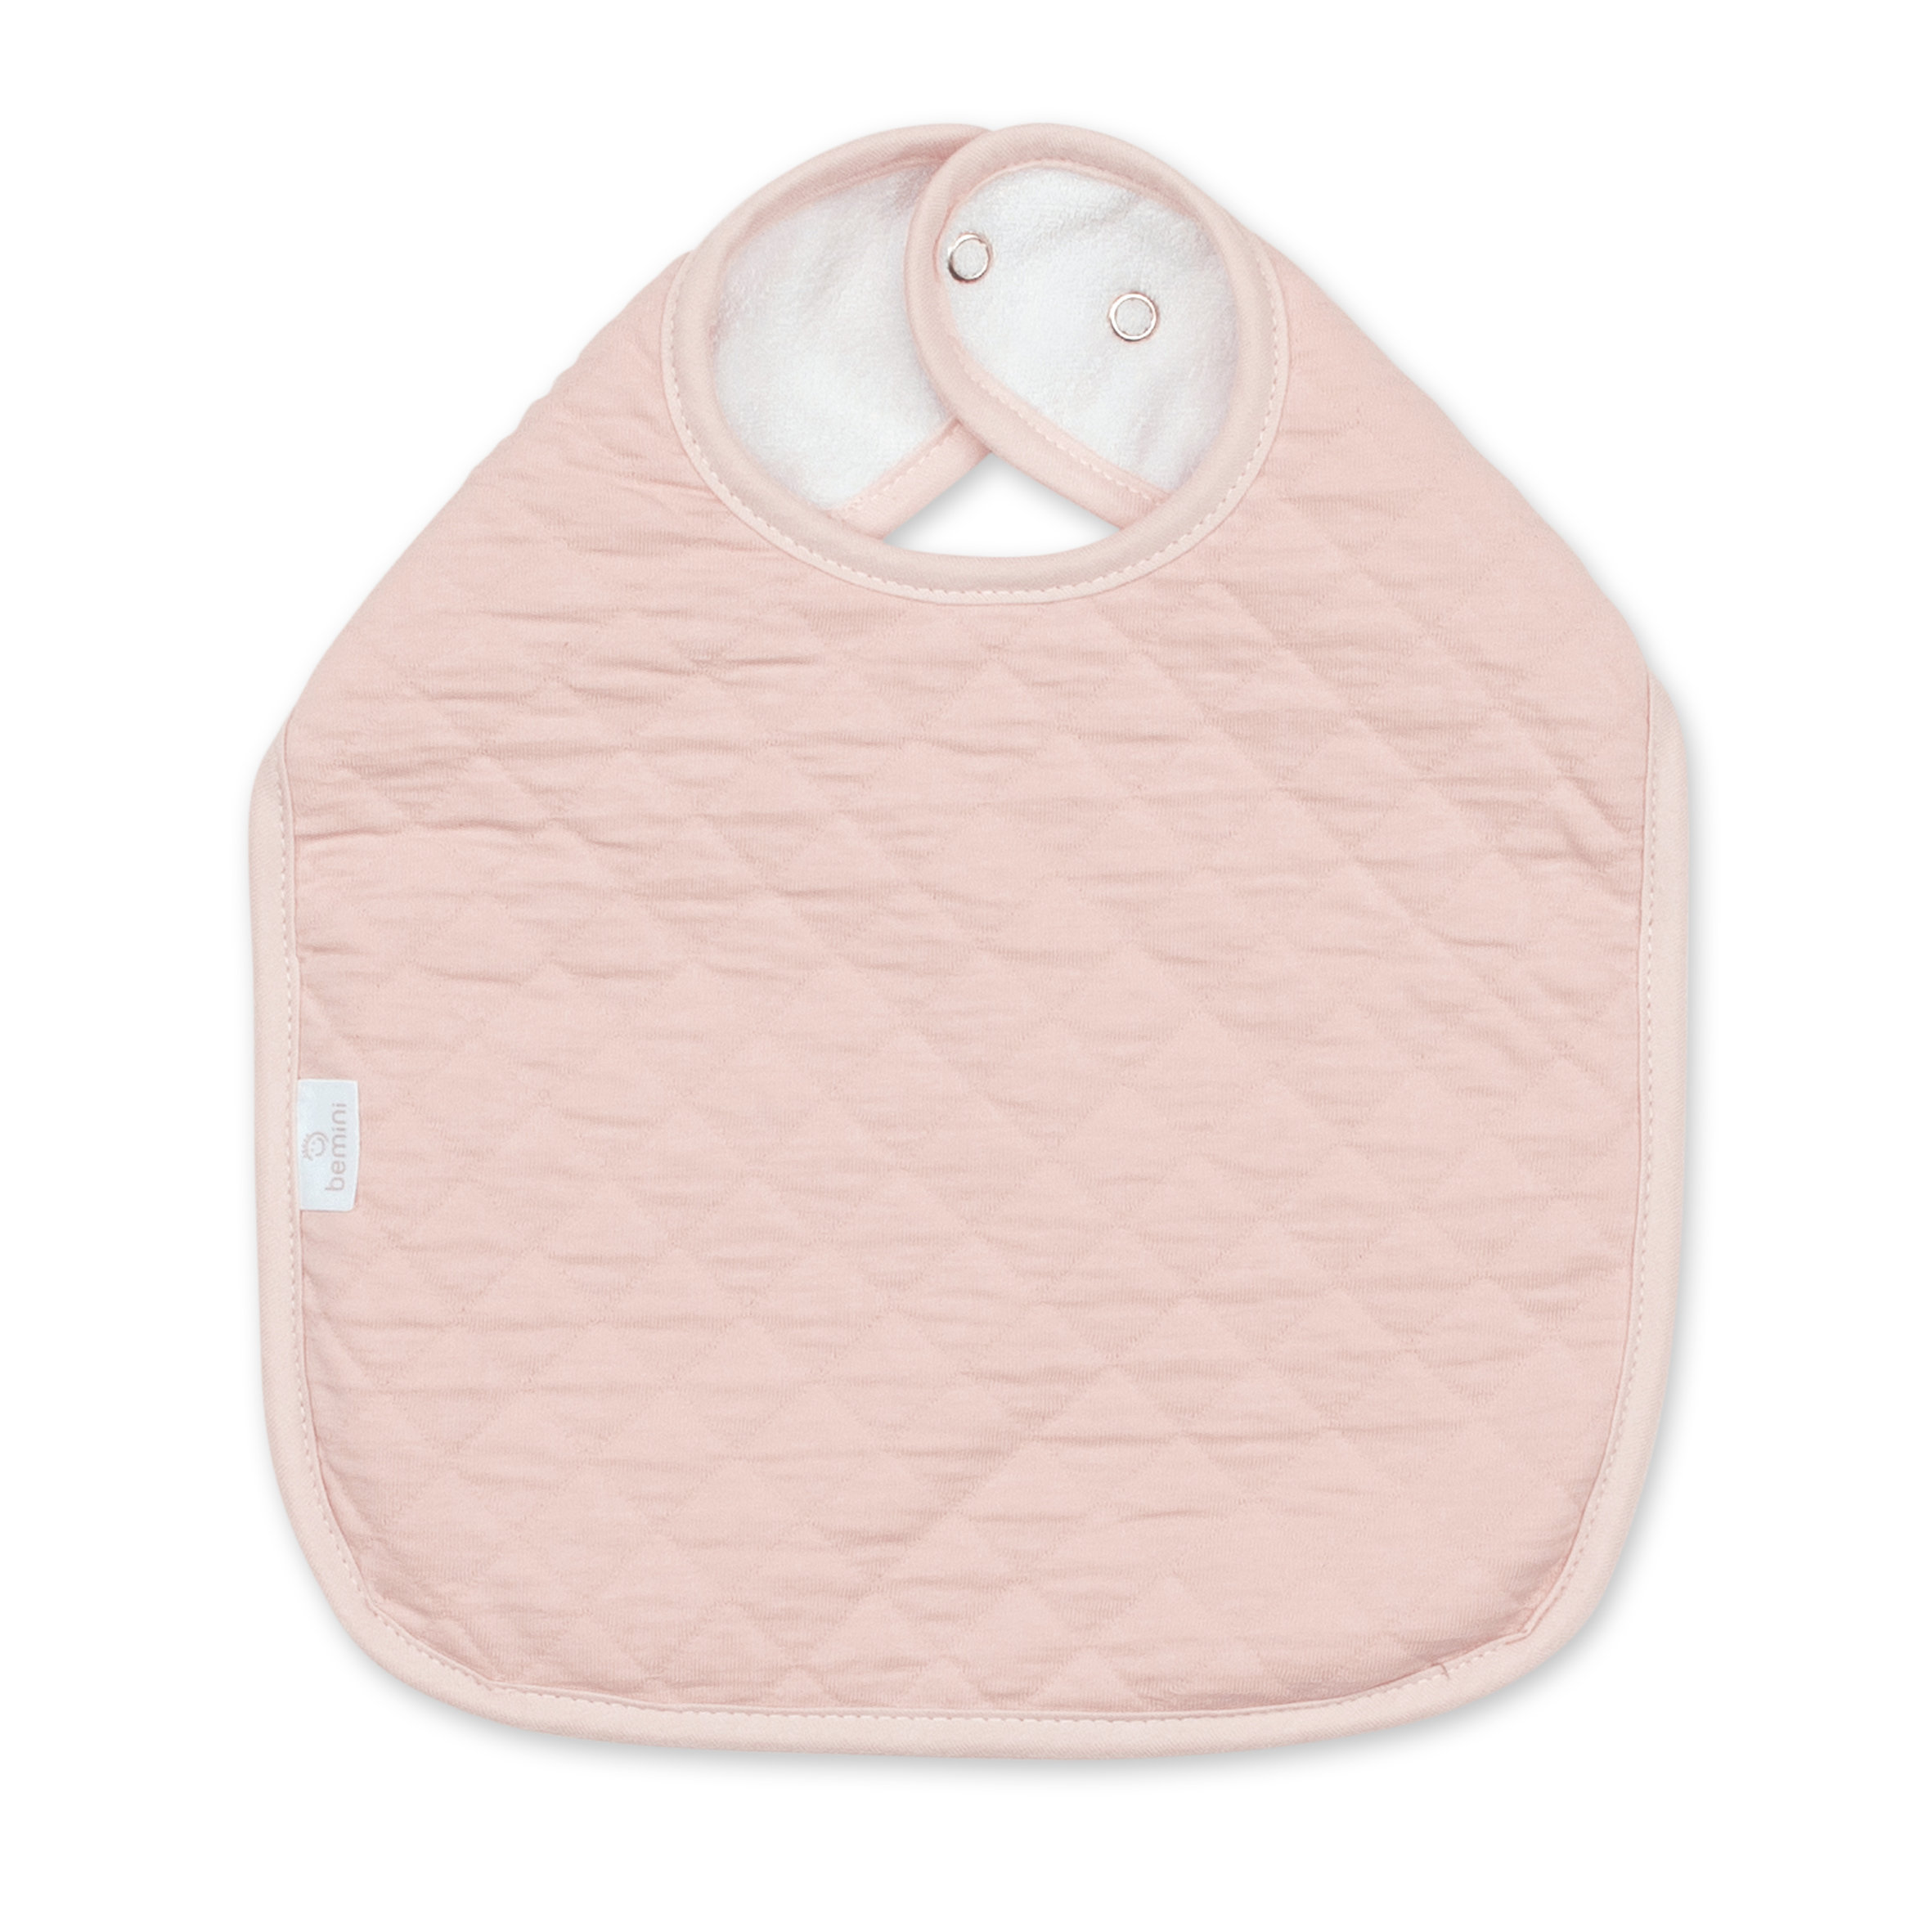 Bib waterproof Pady quilted jersey 37cm QUILT Blush